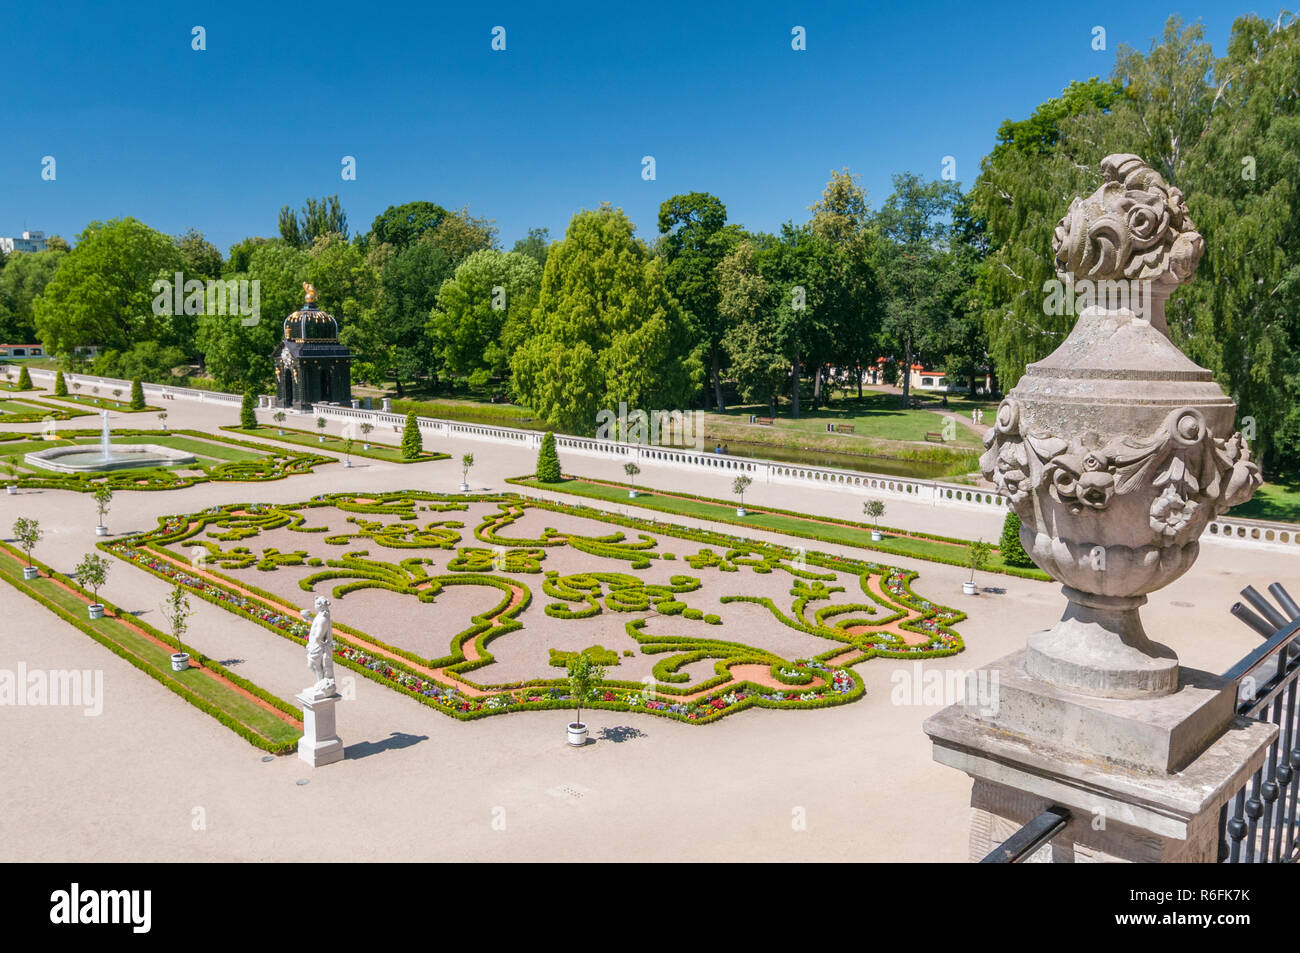 Gardens Of The Palace Branicki In Bialystok, Poland Called The Versailles Of The North And Polish Versailles Stock Photo